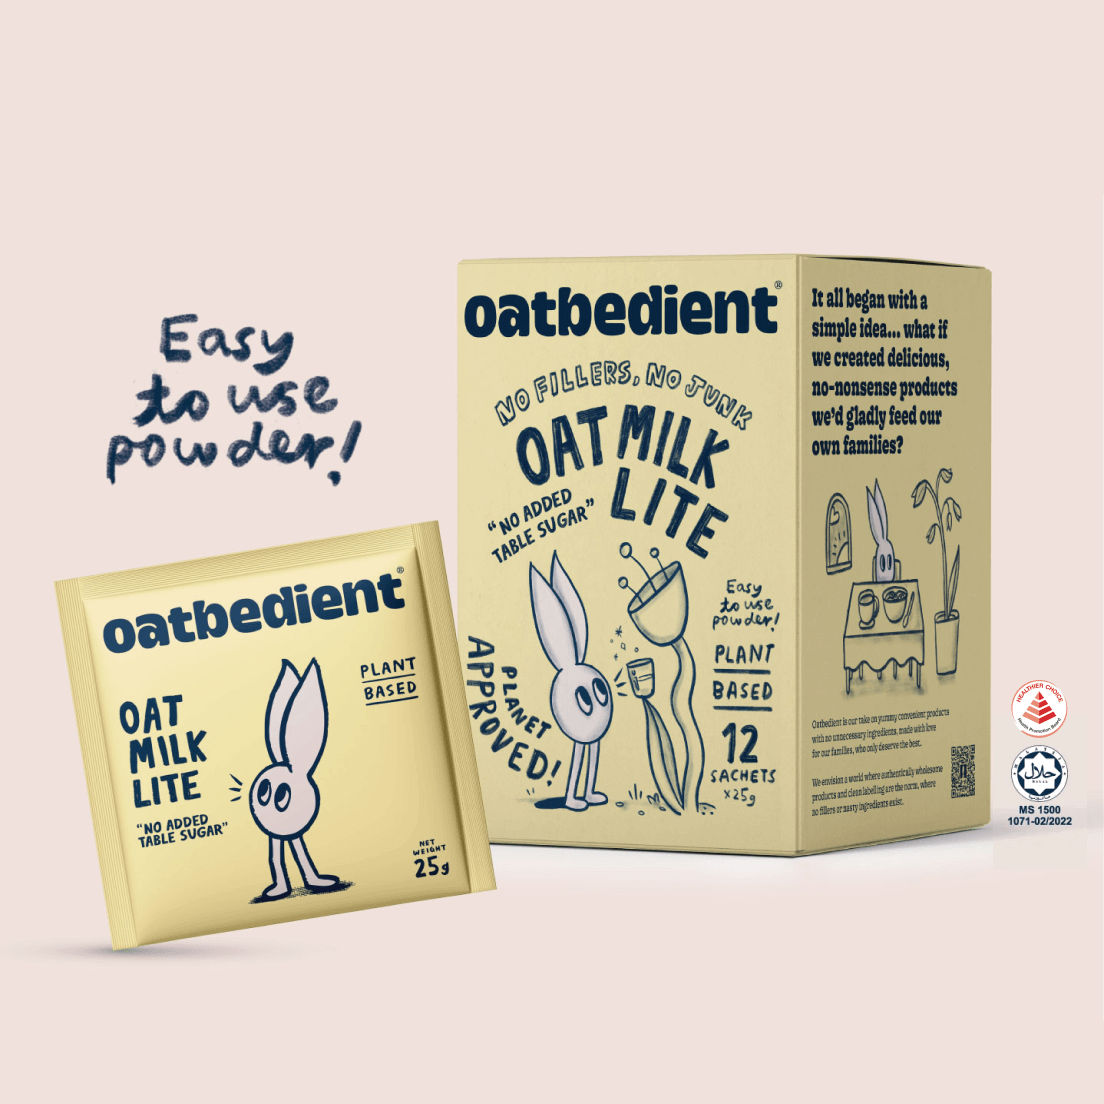 oat milk lite with no added table sugar